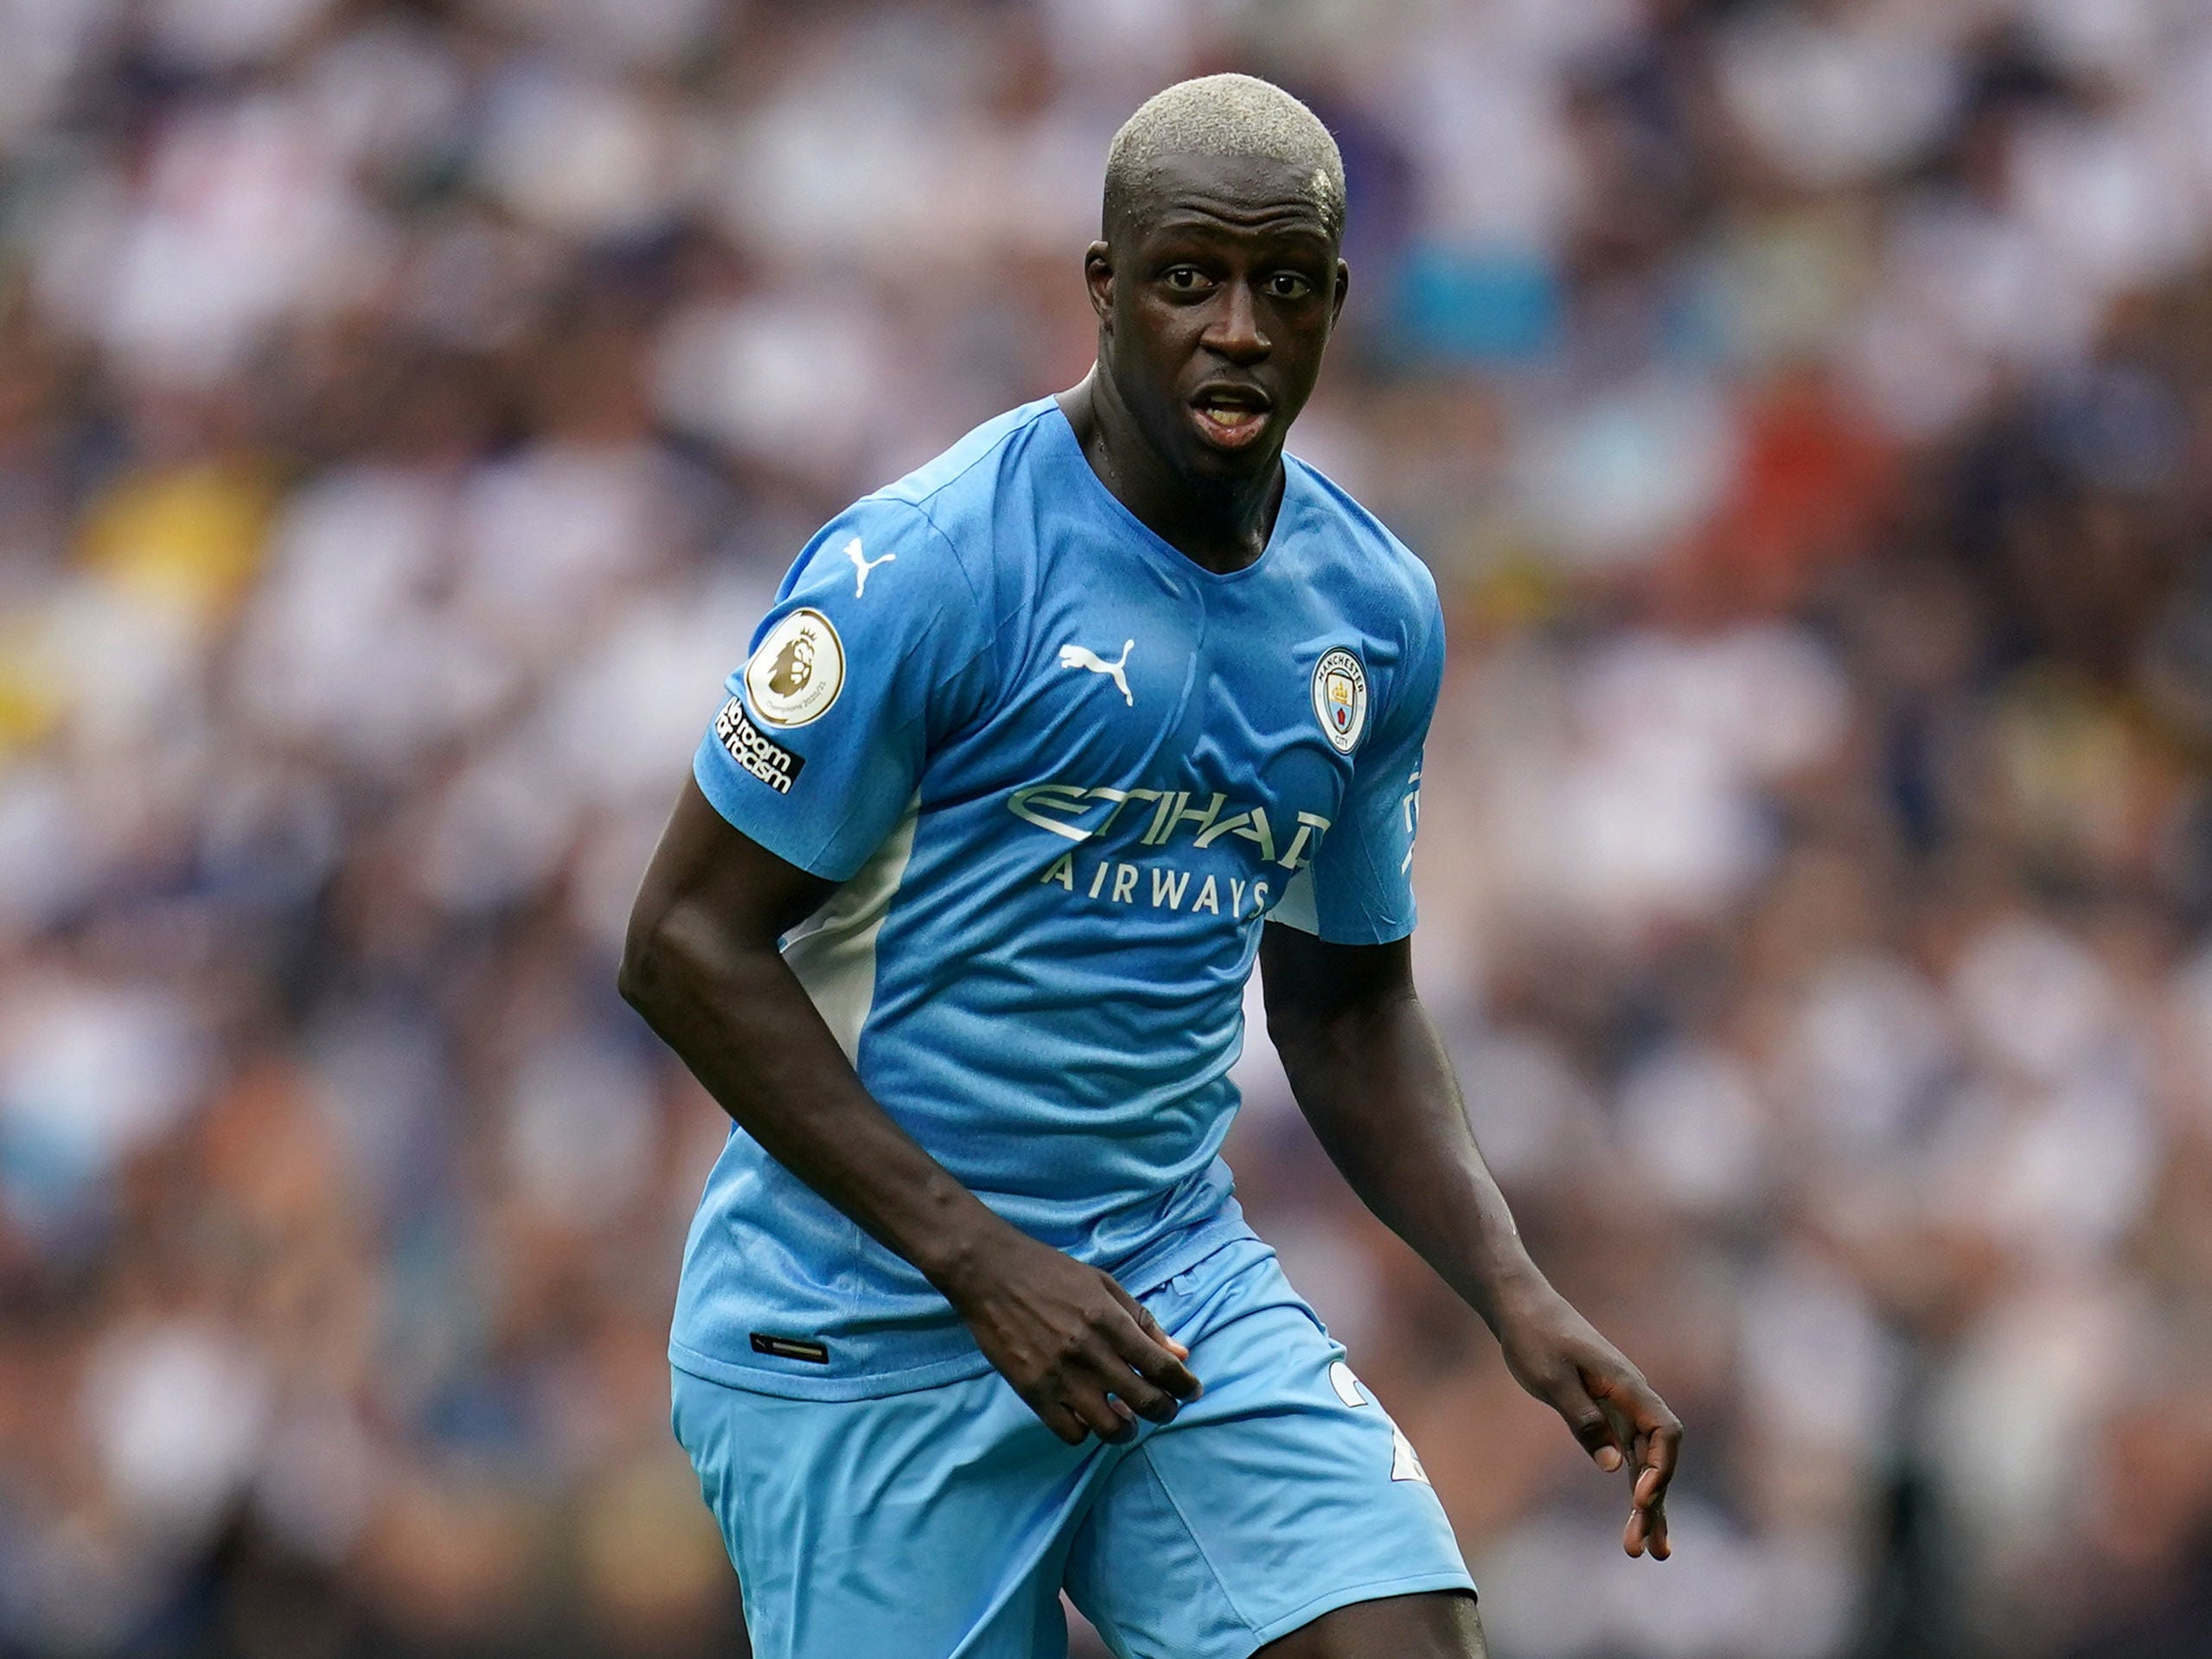 Manchester City’s Benjamin Mendy has been denied bail ahead of potential trial on rape charges